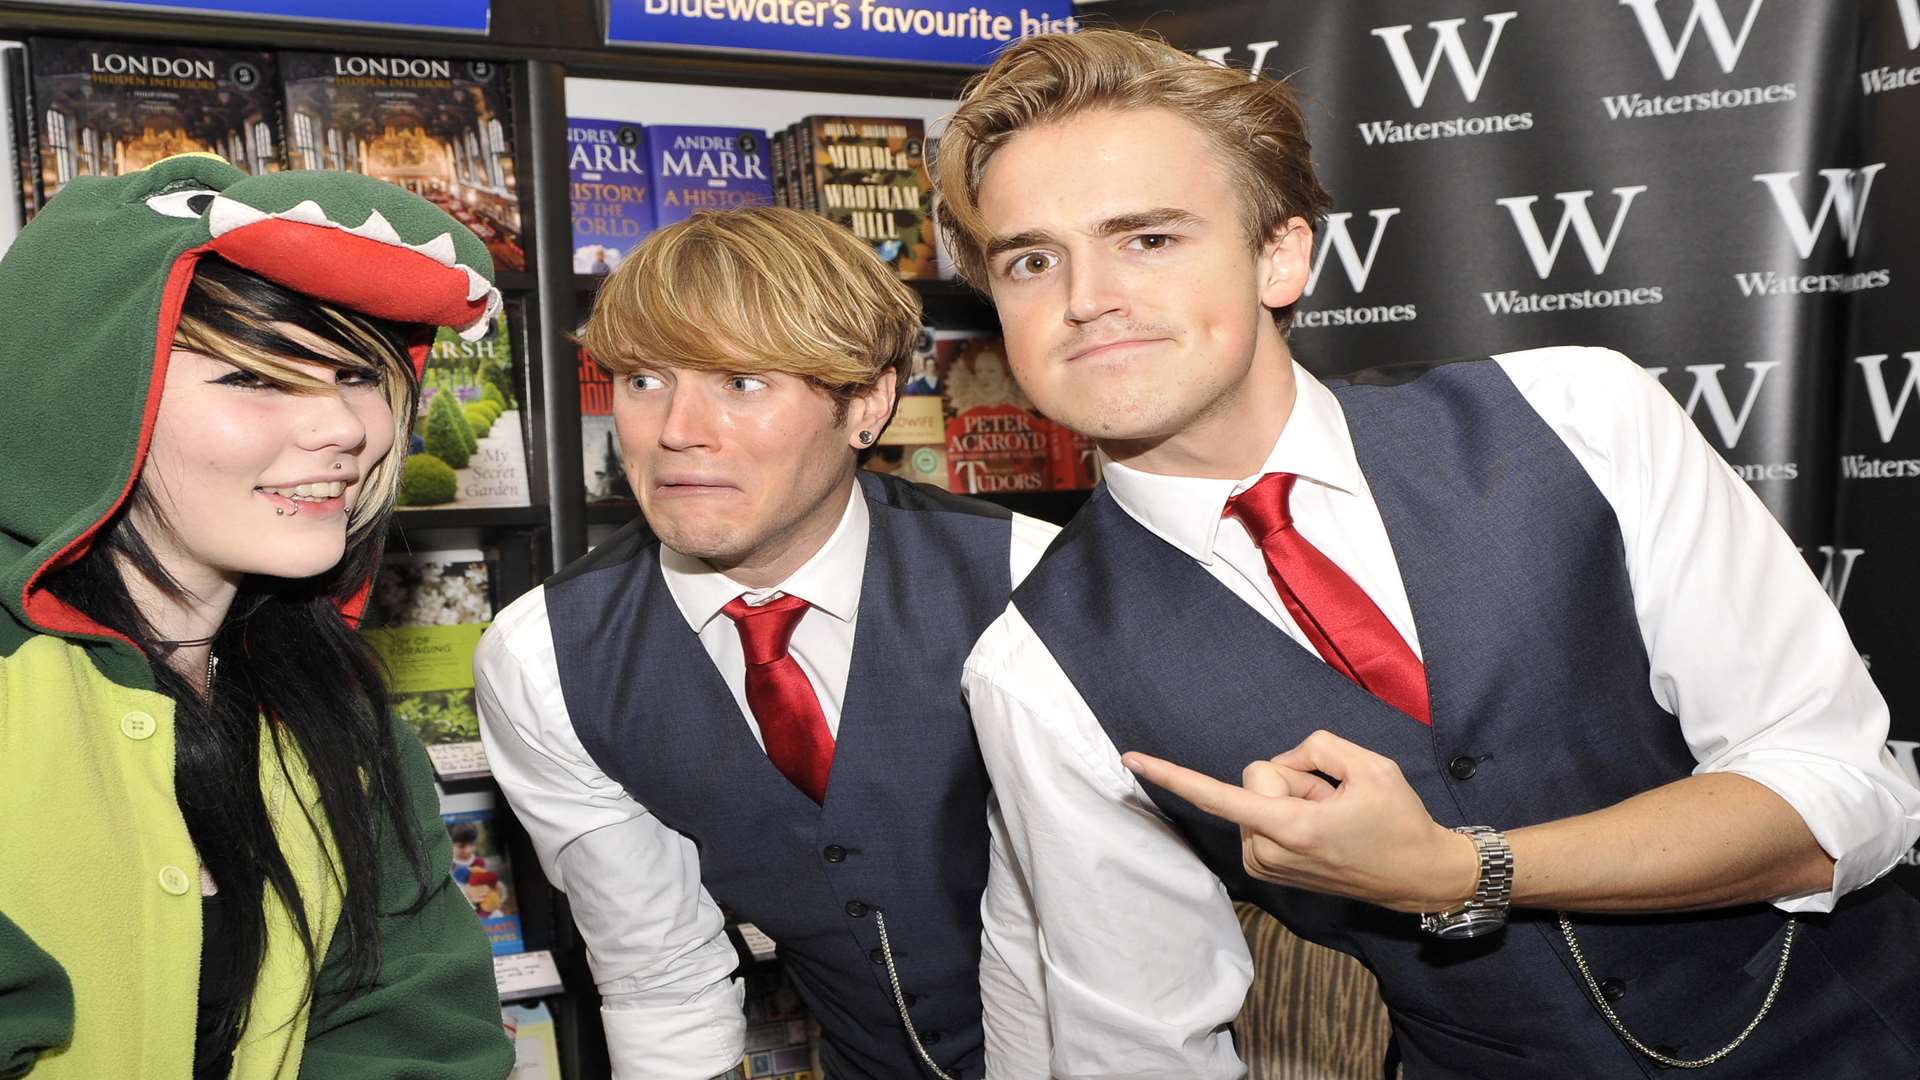 McFly's Dougie Poynter and Tom Fletcher, right, at a Bluewater book signing